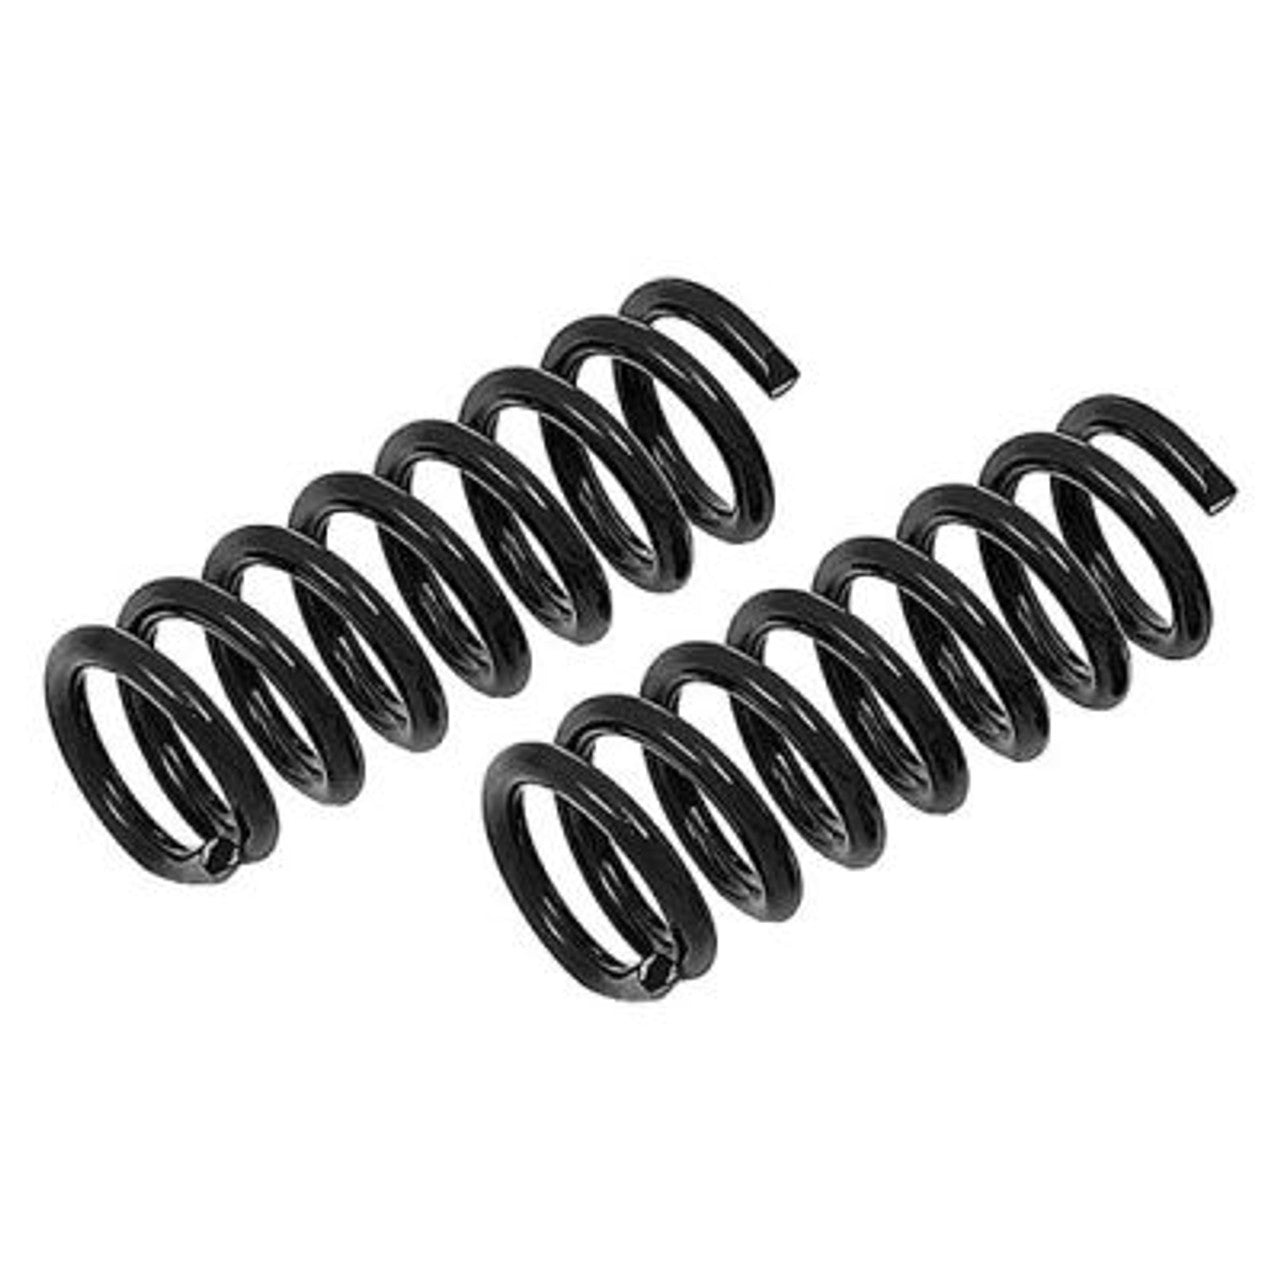 Fabtech FTS98100-3 2.5in. PERF SYS W/STEALTH 98-08 FORD RANGER 2WD COIL SPRING FR T SUSP W/4.0L V11